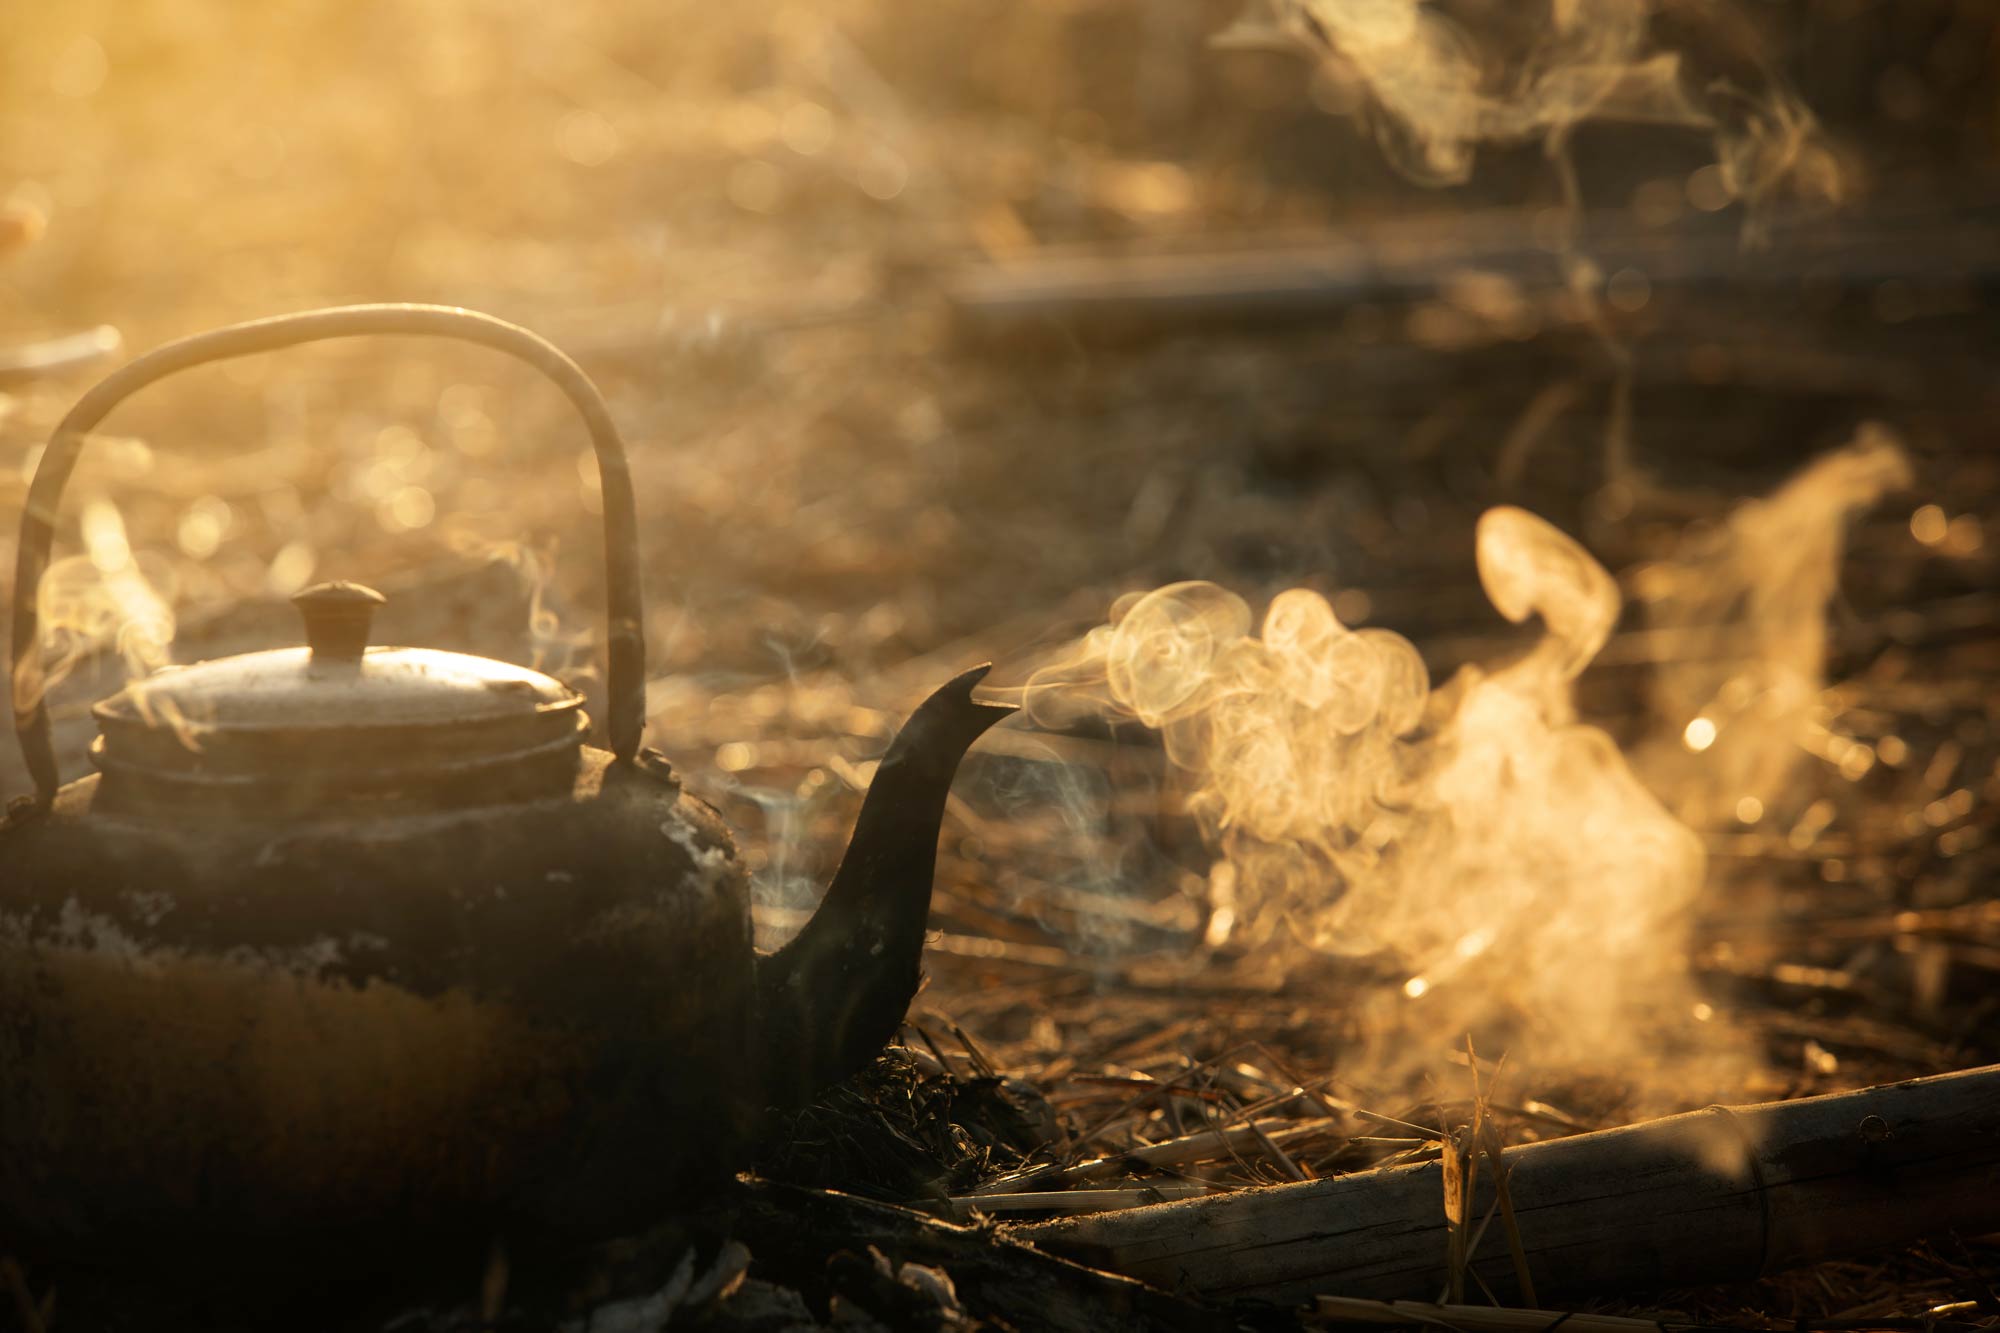 Steaming kettle sitting in gold light